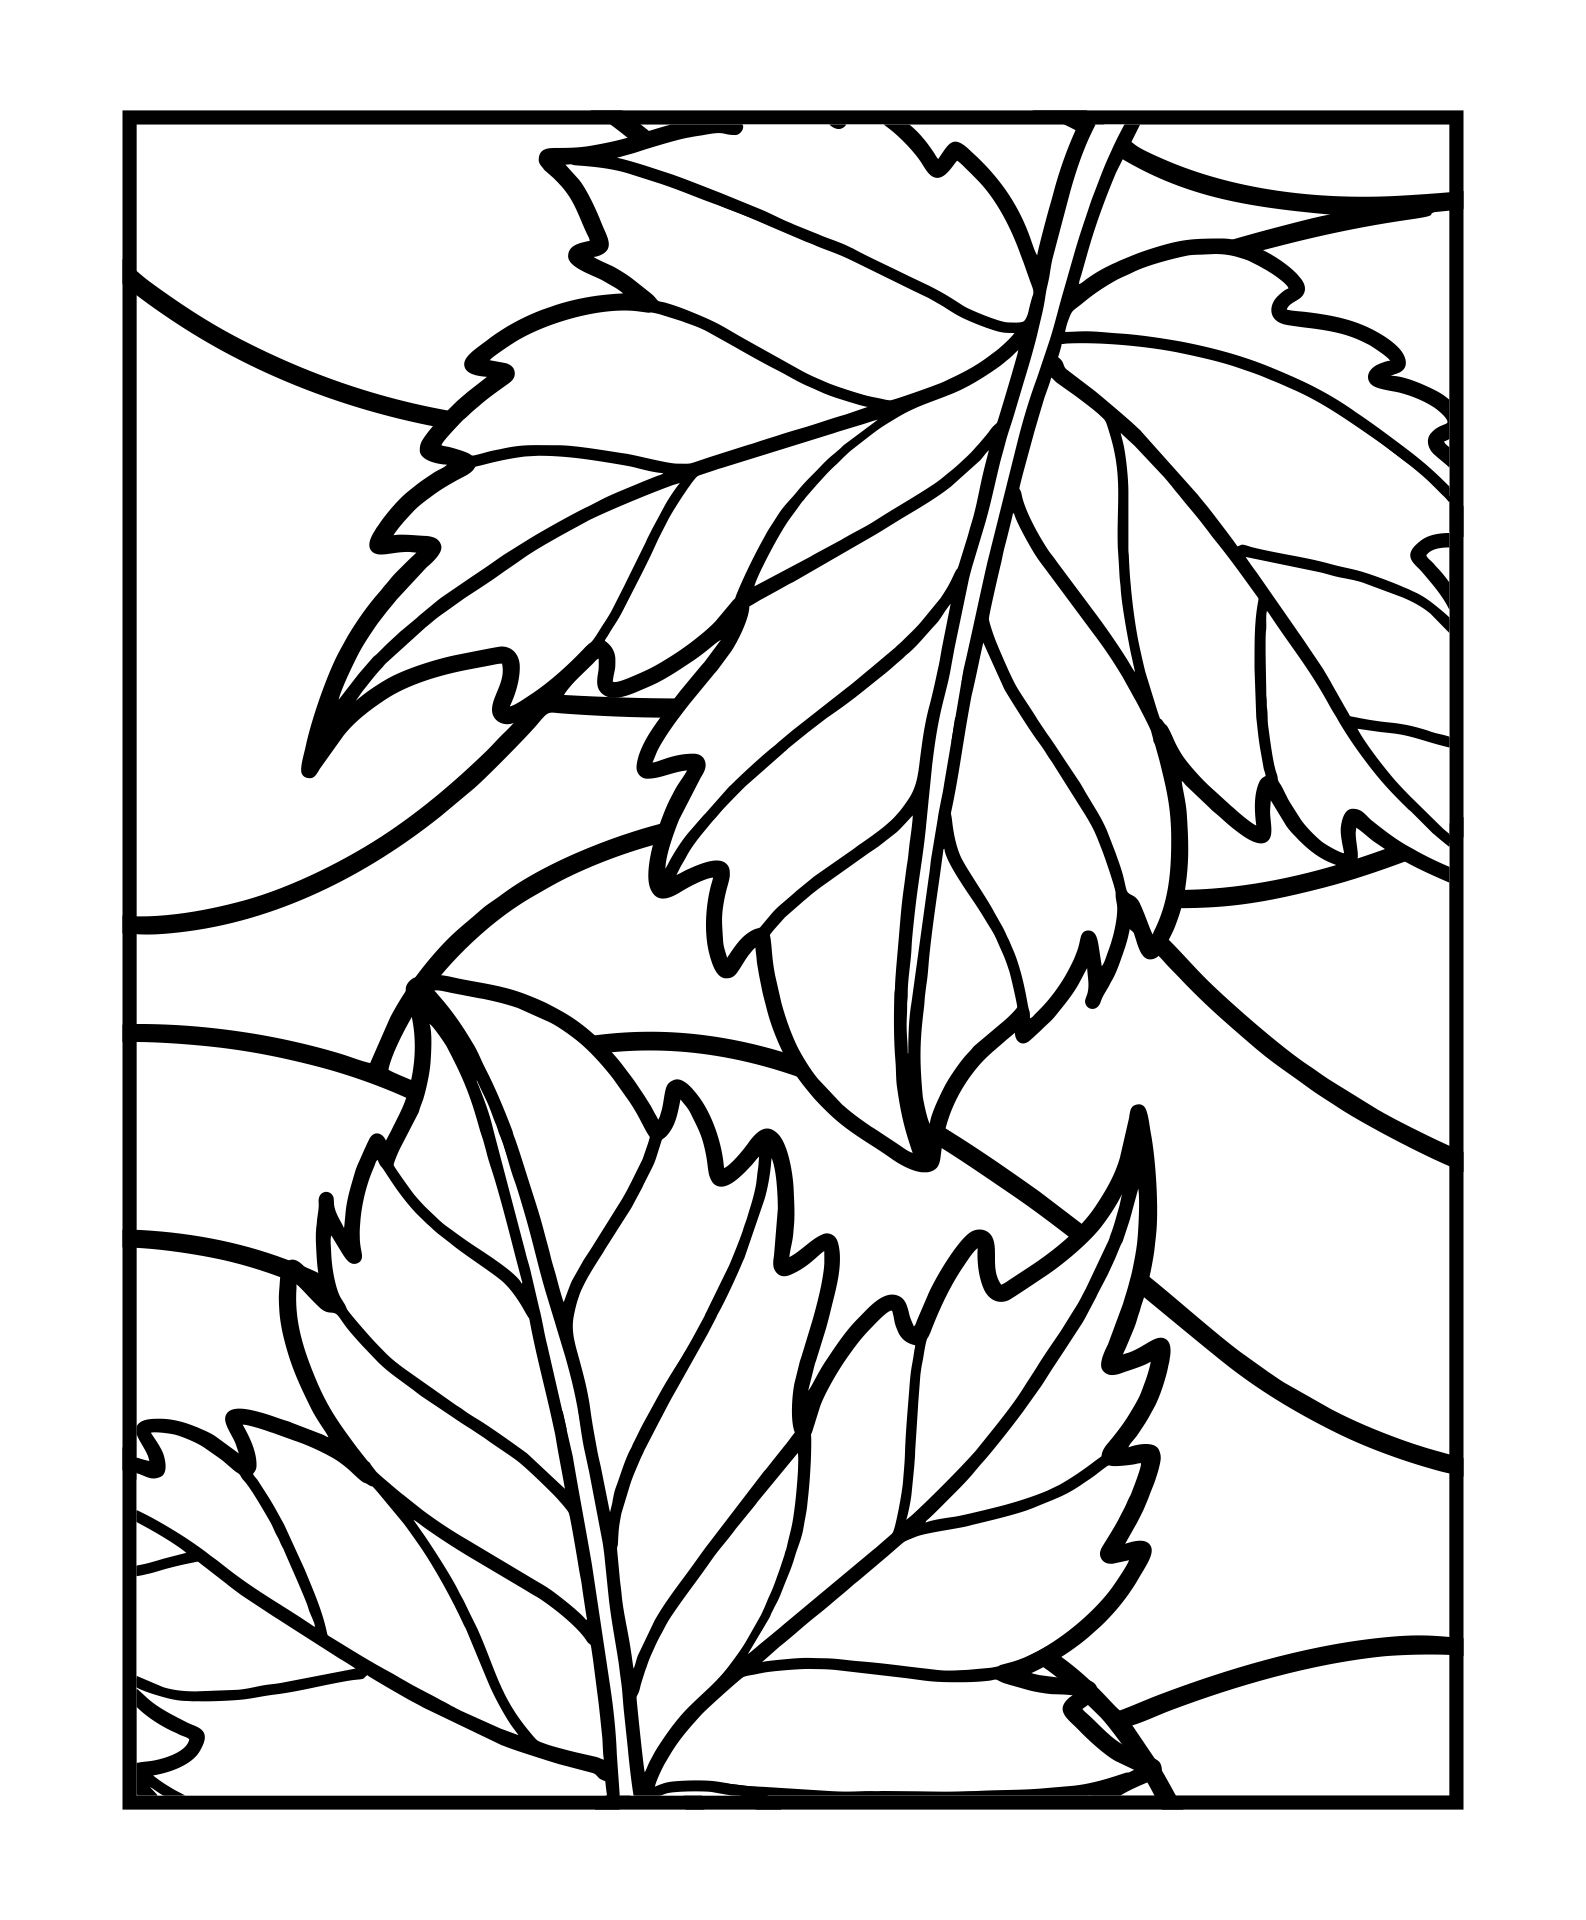  Printable Stained Glass Fall Patterns